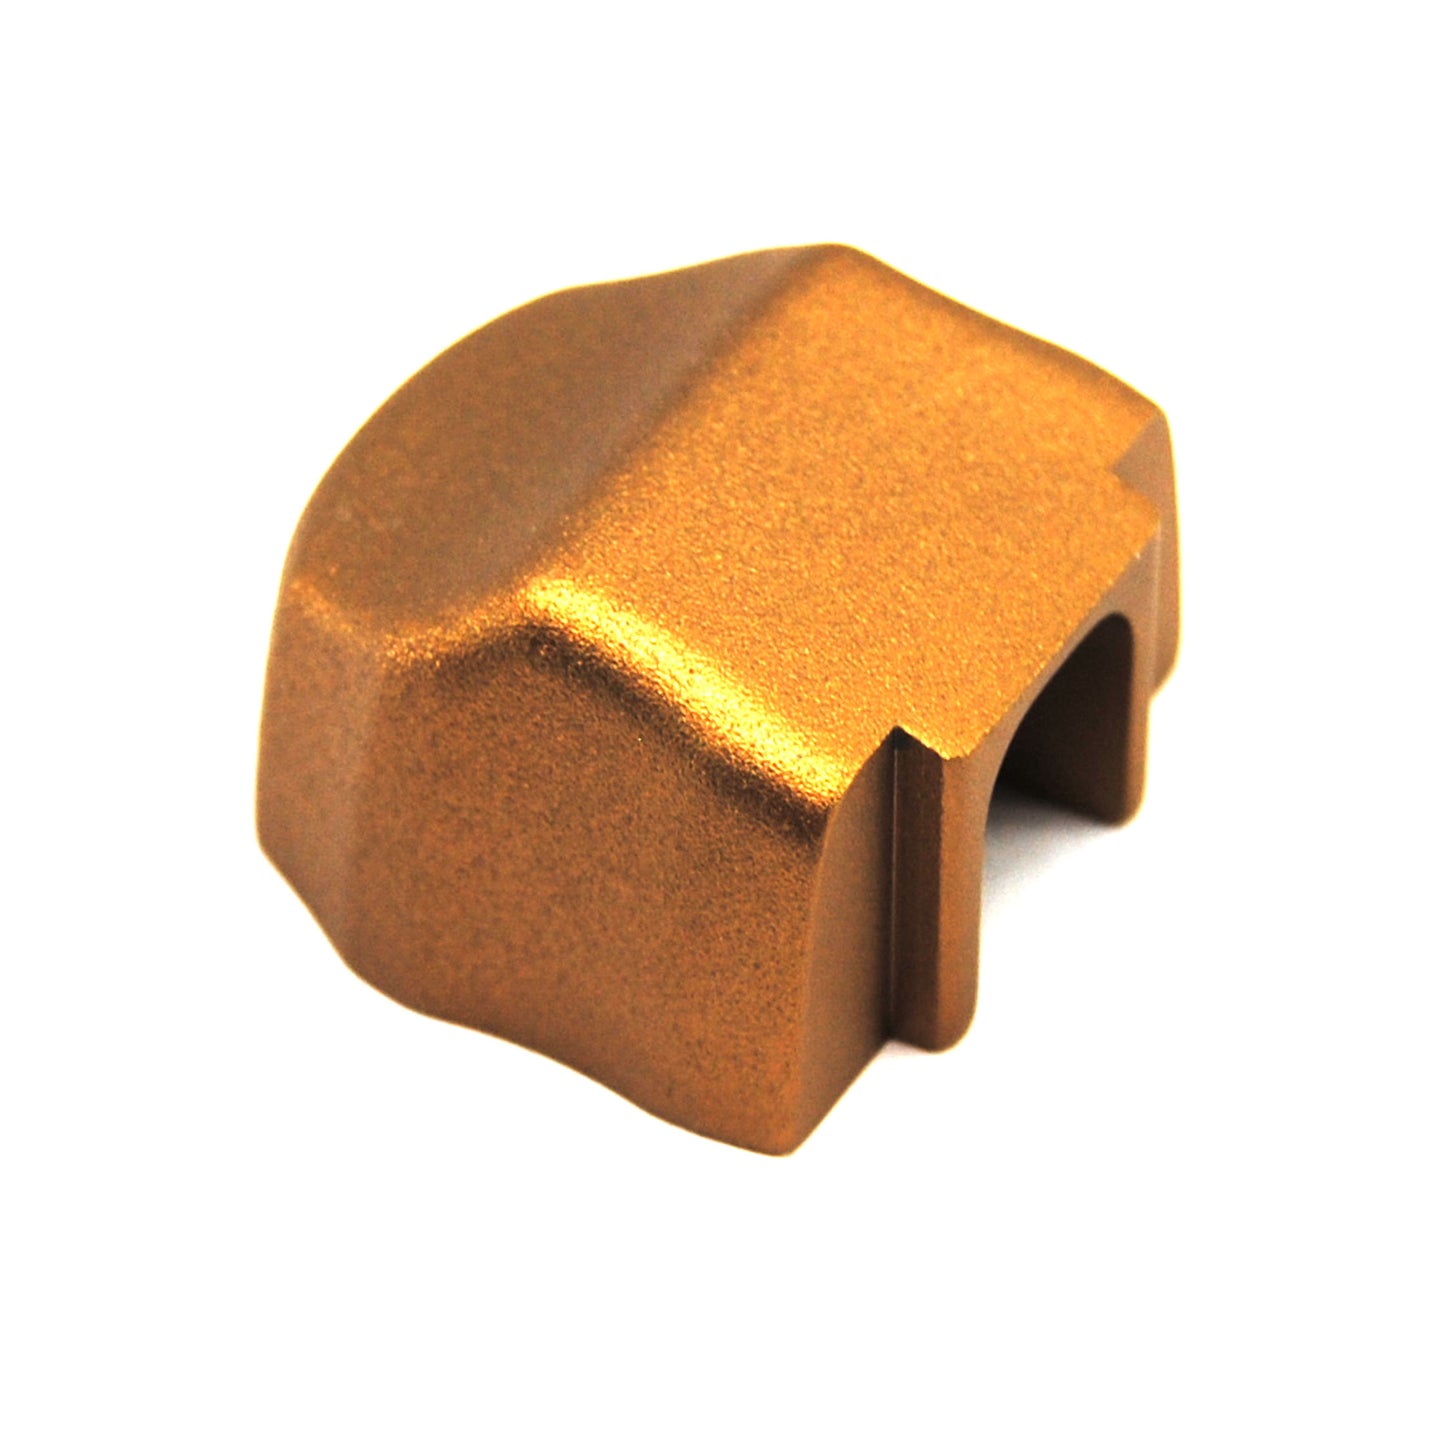 Empire Syx Replacement Part - Back Cap - Dust Dark Gold